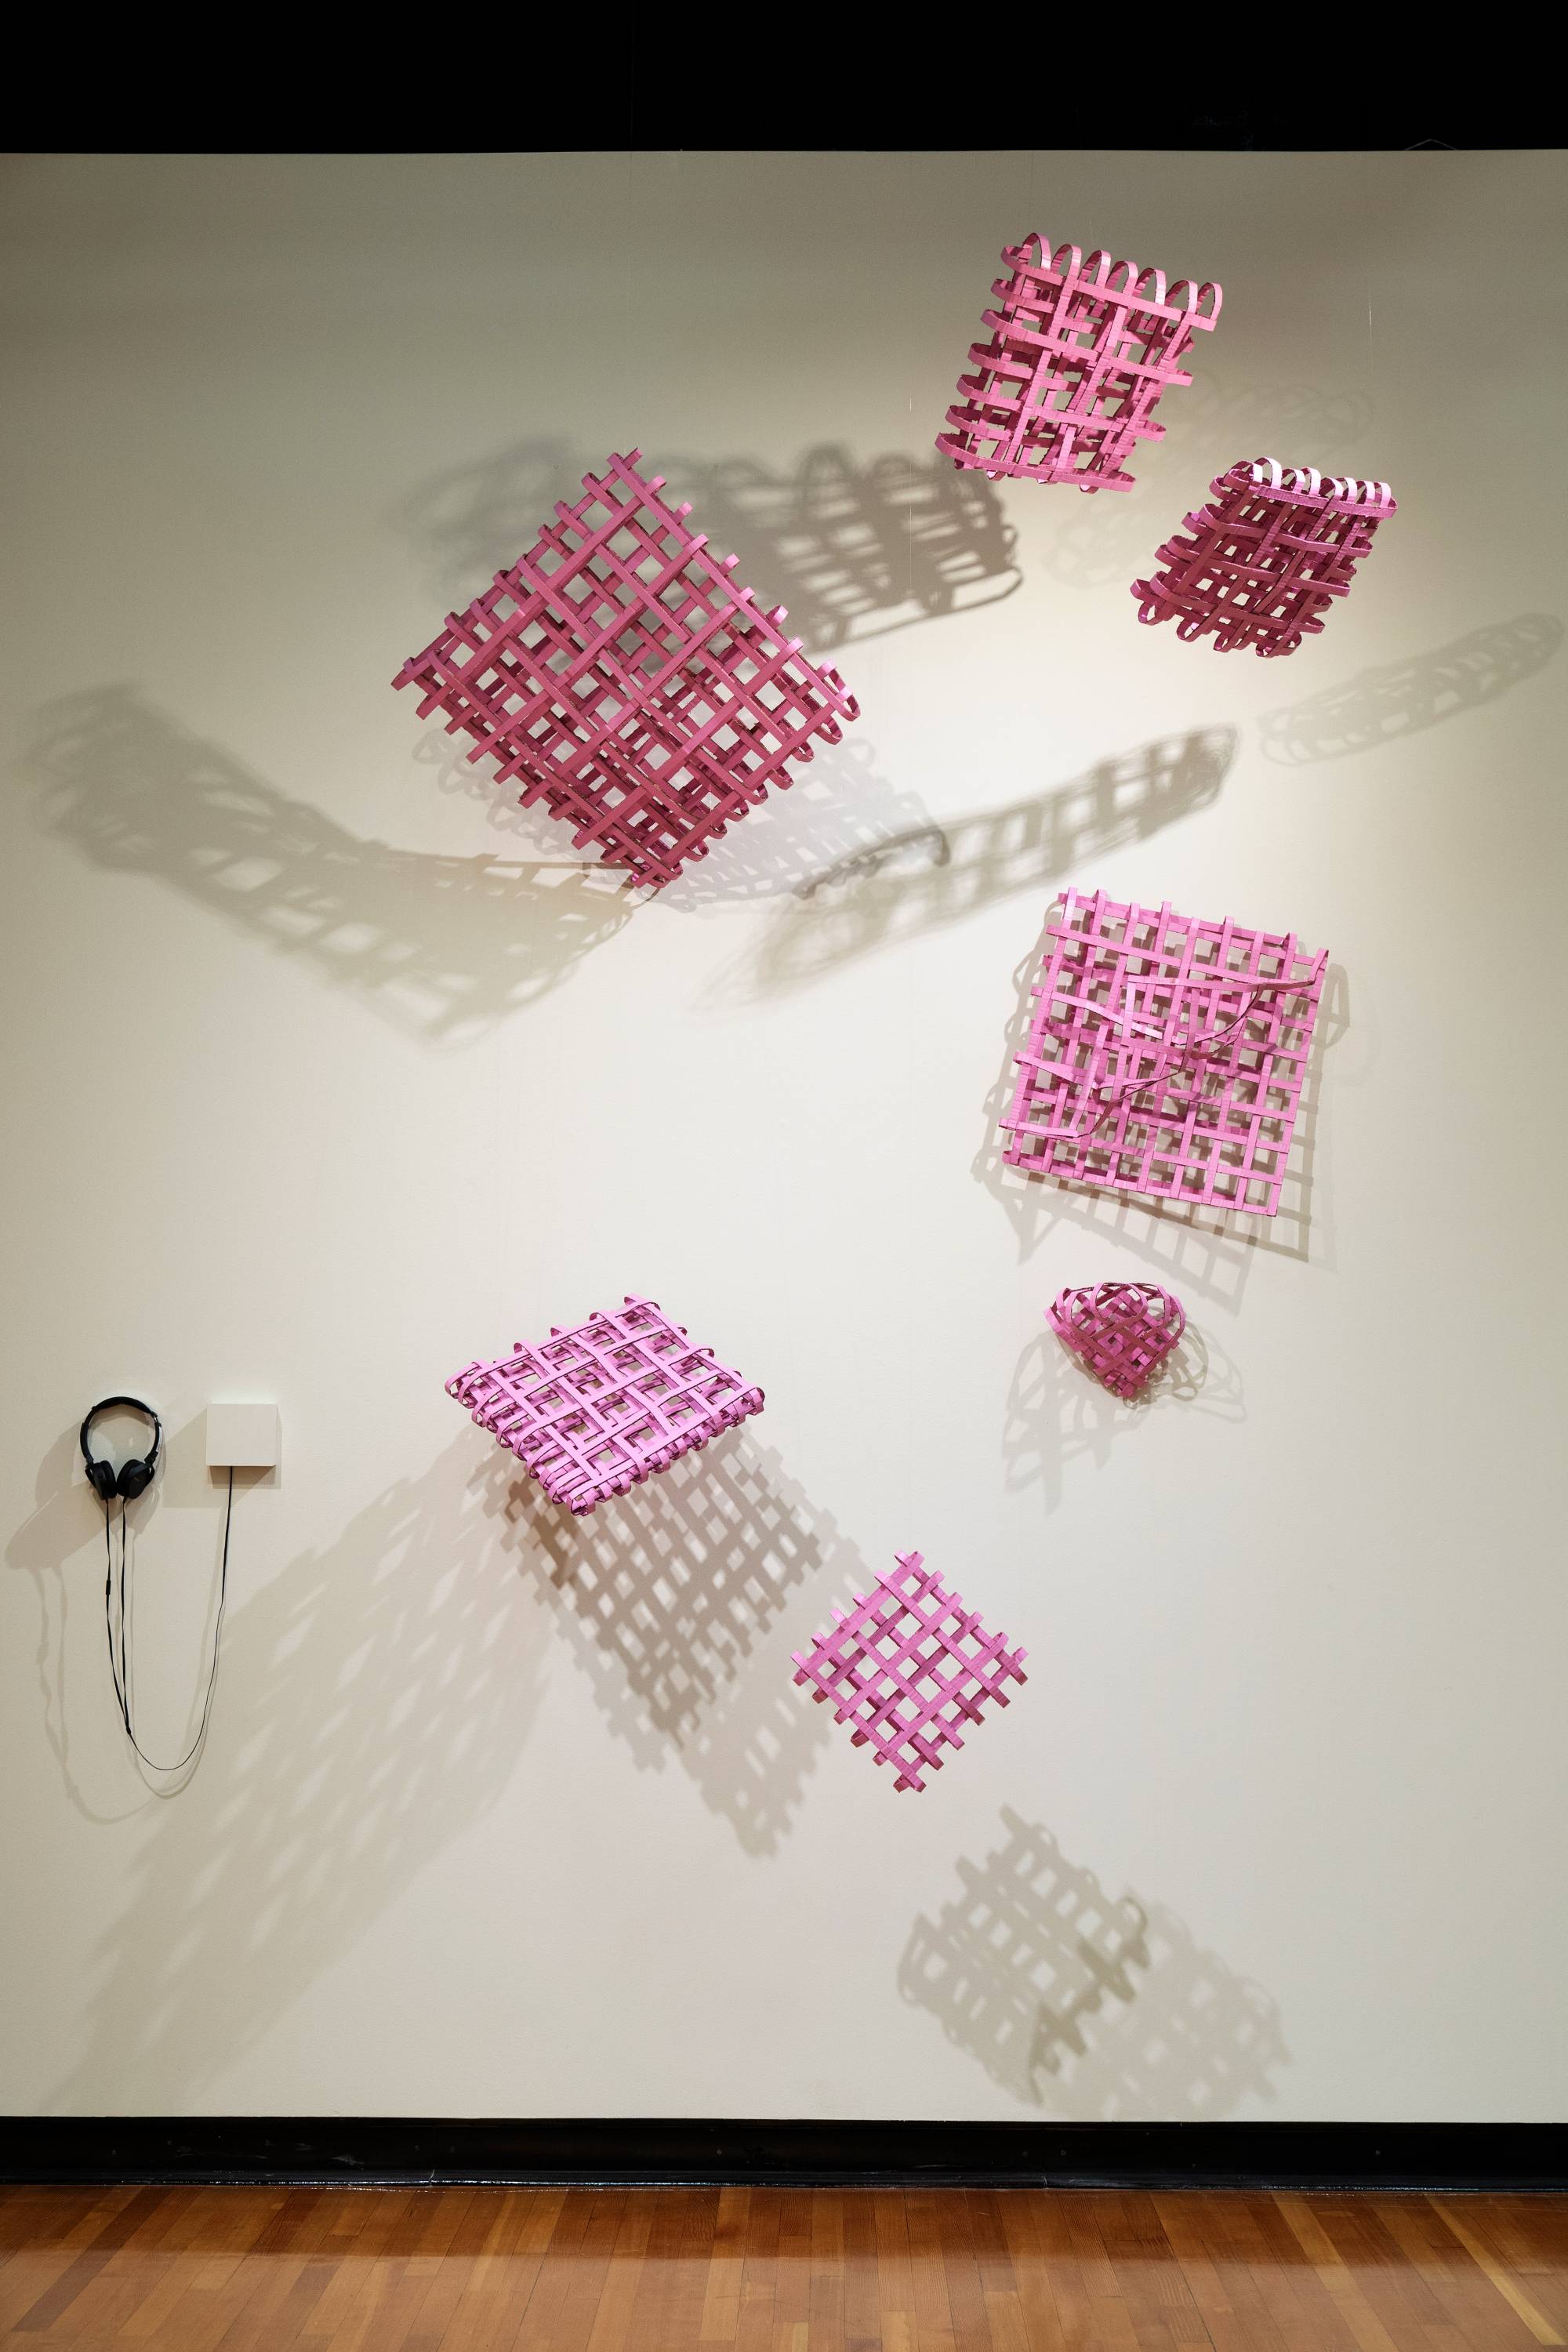 installation of woven squares of cardboard painted pink